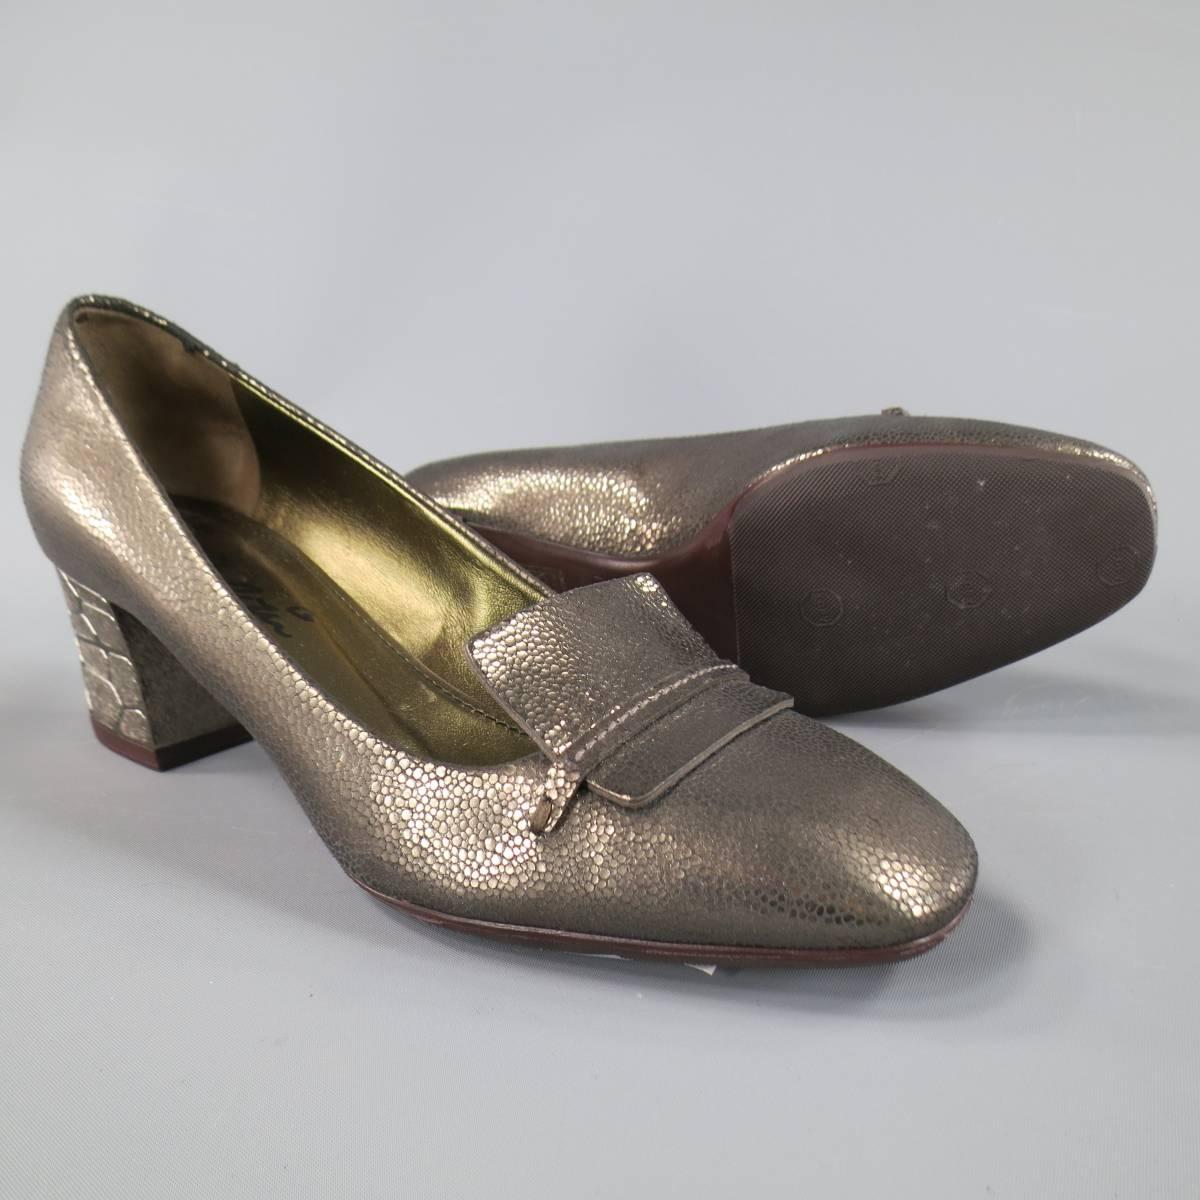 LANVIN pumps in a warm muted silver gold metallic textured leather featuring a square toe, minimalist loafer detail, and chunky metal heel. Made in Italy.
 
Good Pre-Owned Condition.
Marked: IT 39
 
Heel: 2.45 in.